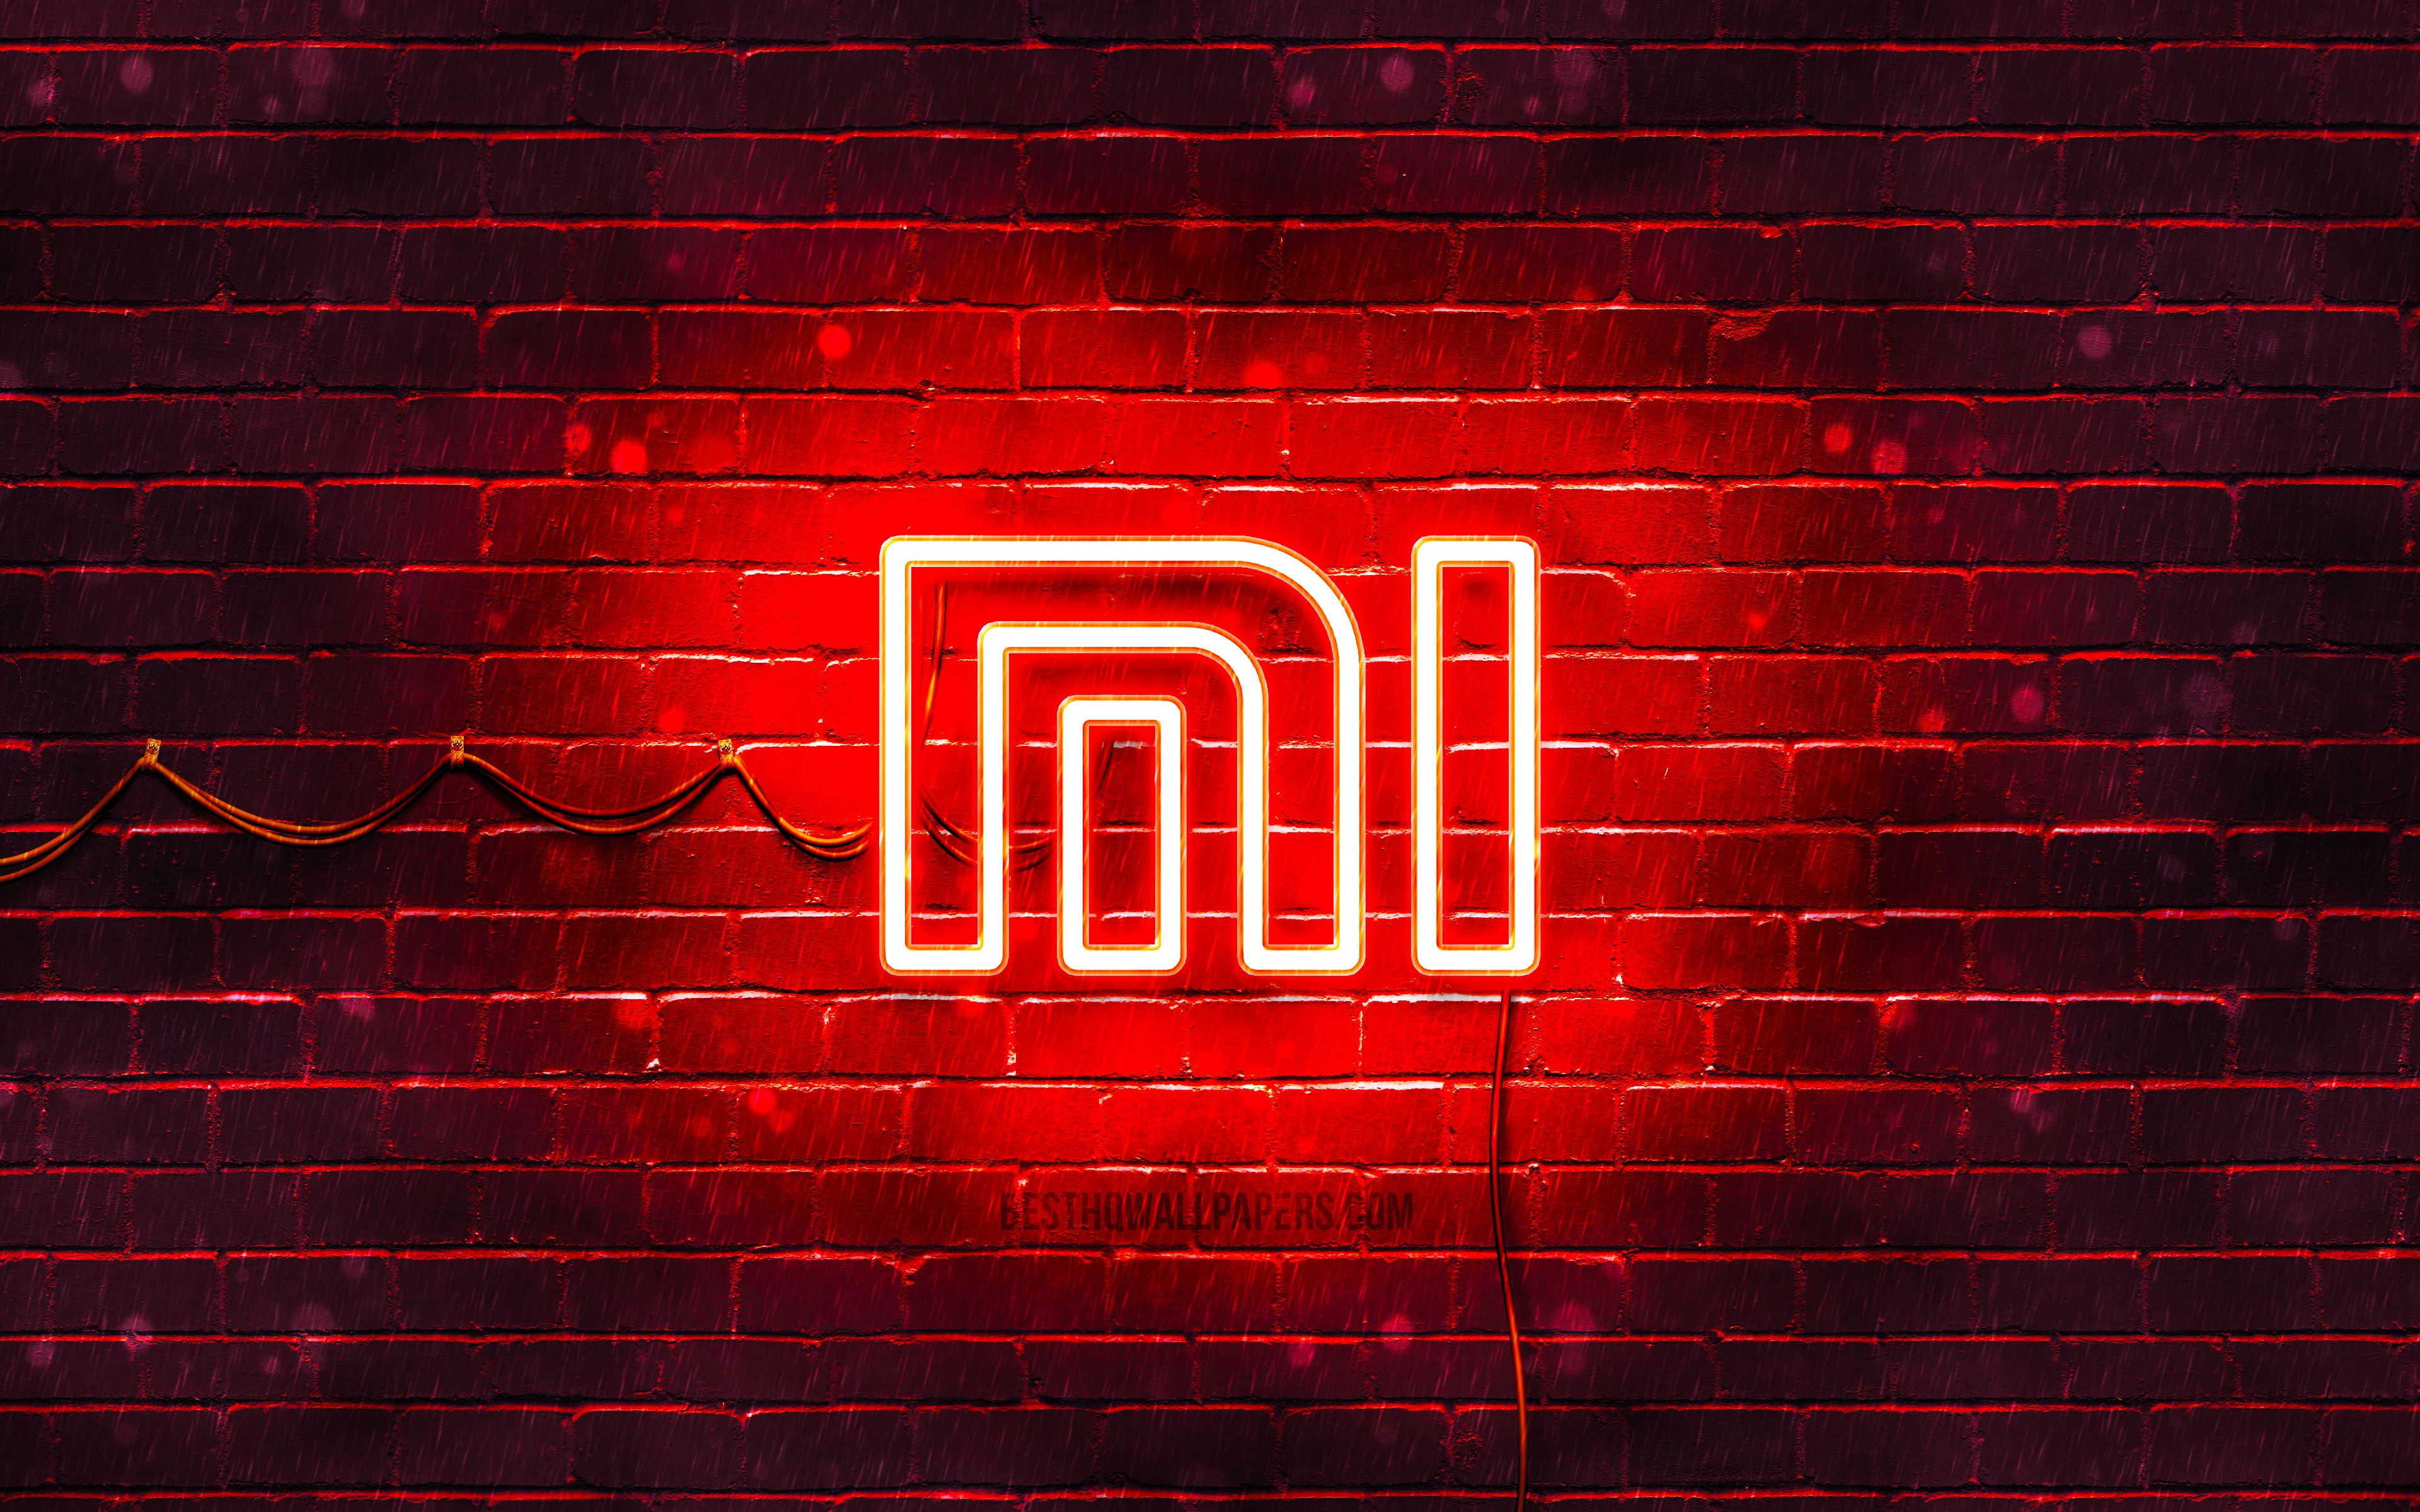 Download wallpaper Xiaomi red logo, 4k, red brickwall, Xiaomi logo, brands, Xiaomi neon logo, Xiaomi for desktop with resolution 3840x2400. High Quality HD picture wallpaper